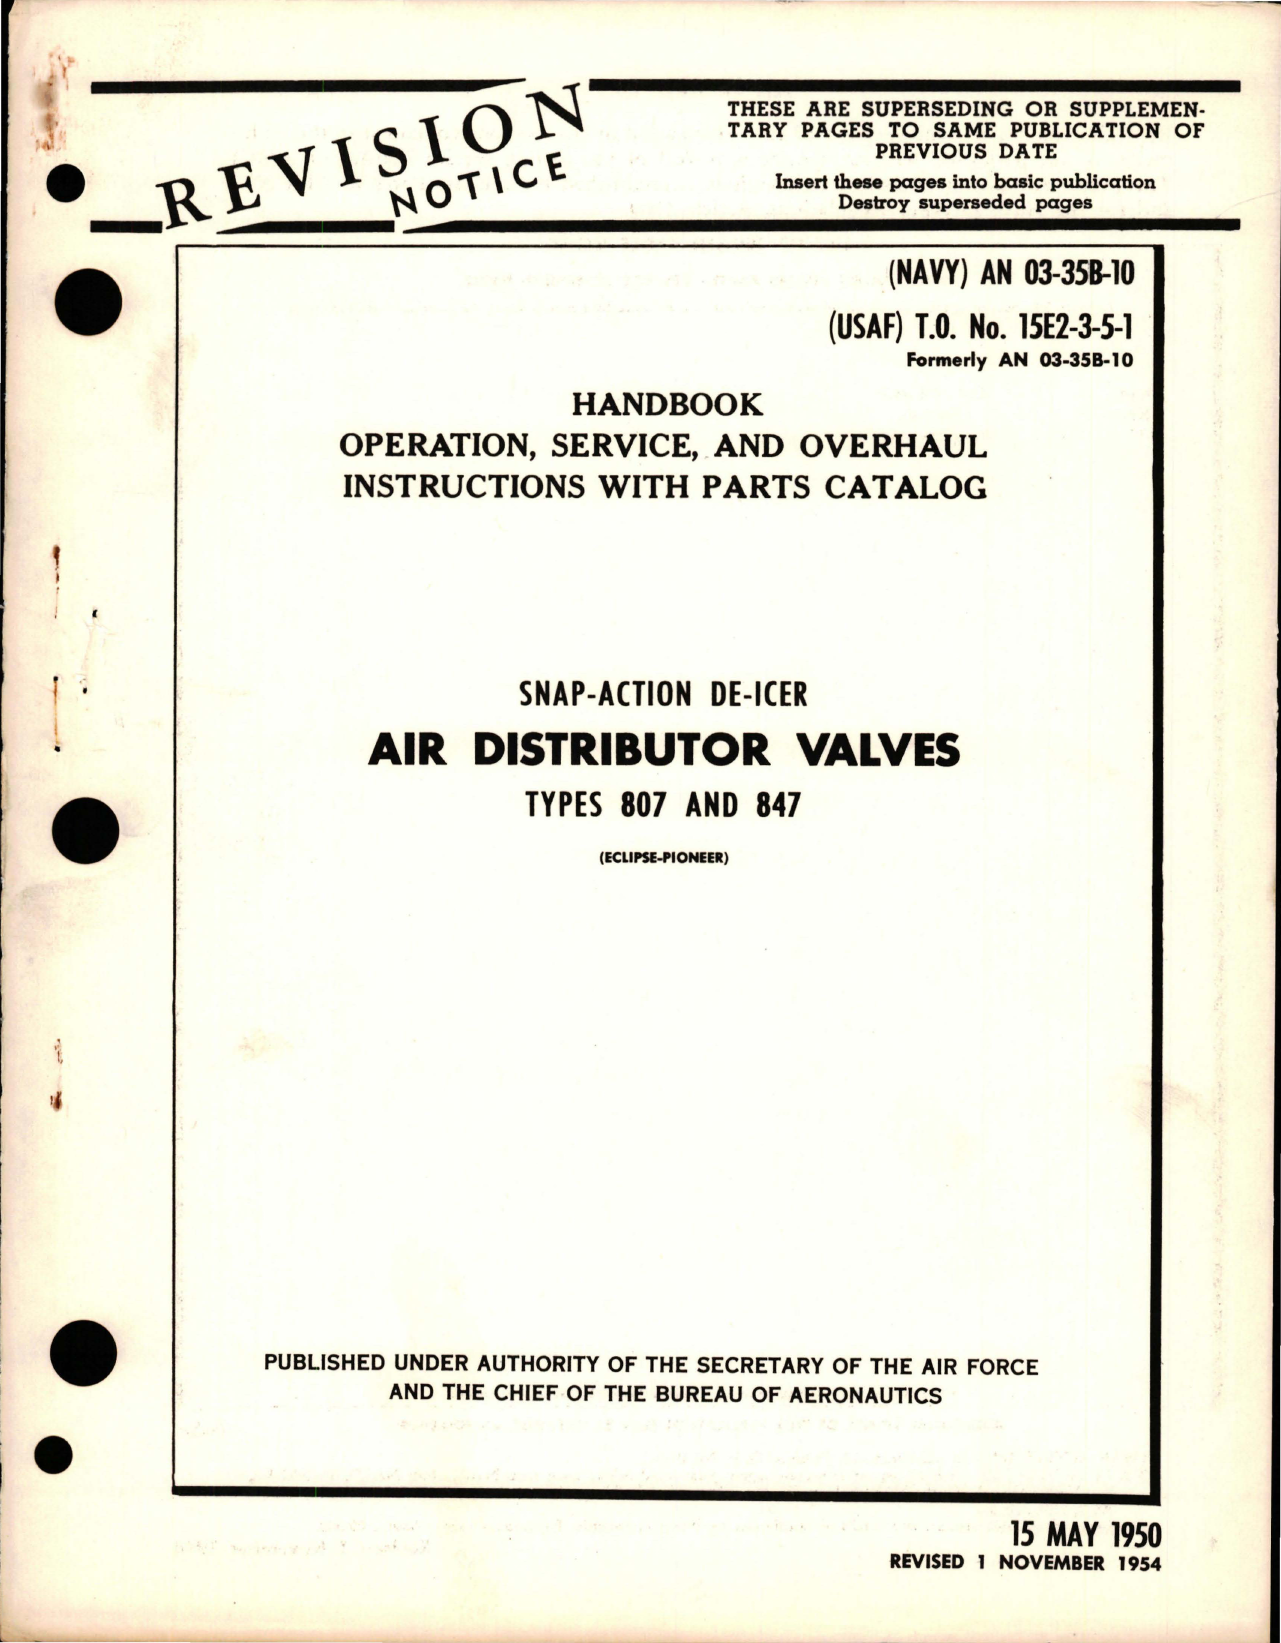 Sample page 1 from AirCorps Library document: Operation, Service and Overhaul Instructions with Parts Catalog for Snap-Action De-Icer Air Distributor Valves - Types 807 and 847